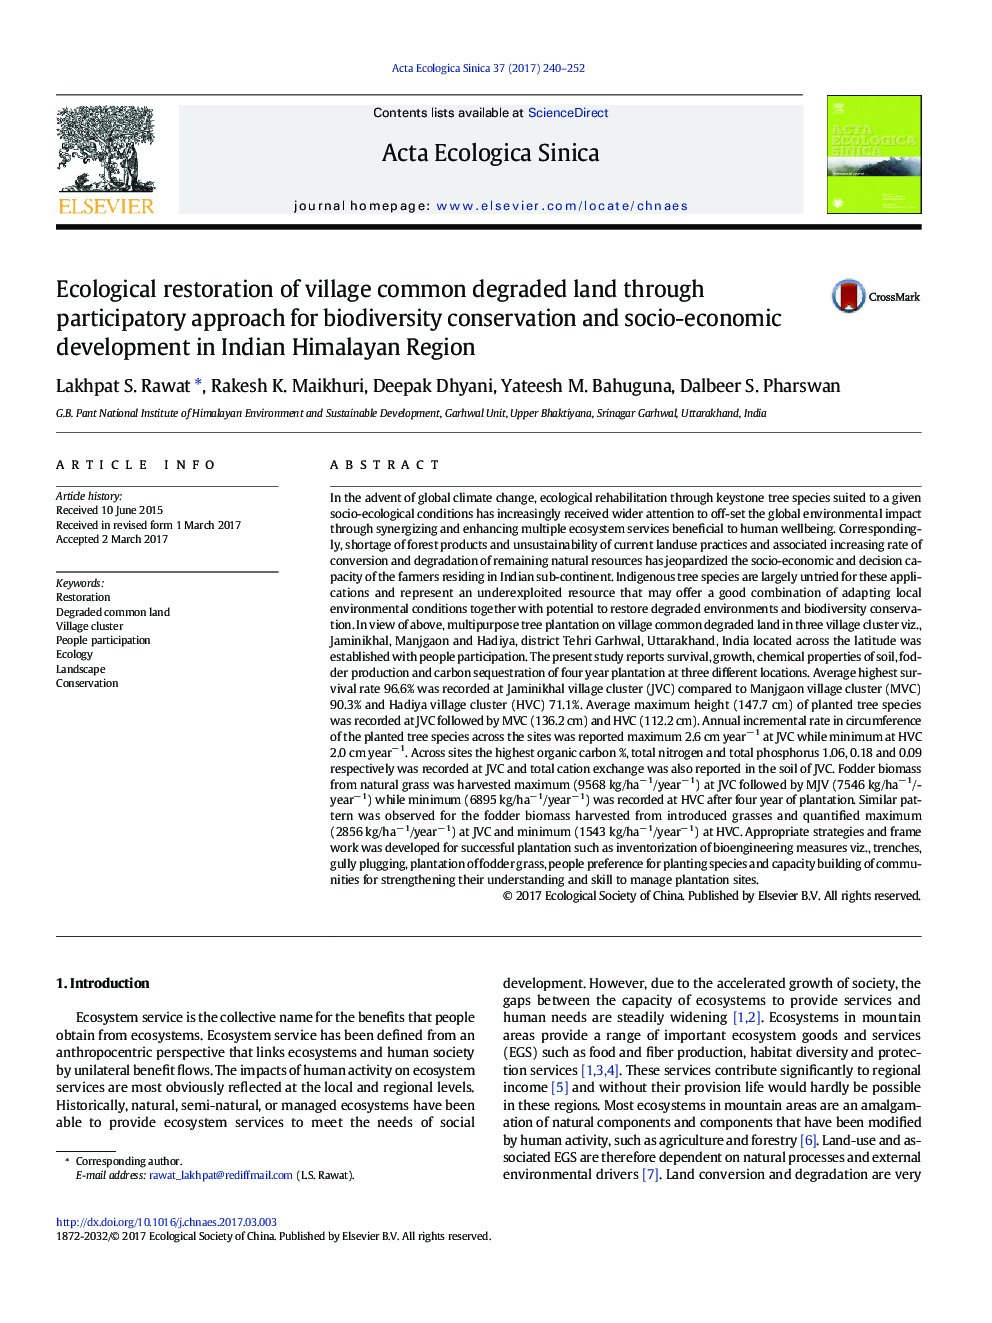 Ecological restoration of village common degraded land through participatory approach for biodiversity conservation and socio-economic development in Indian Himalayan Region